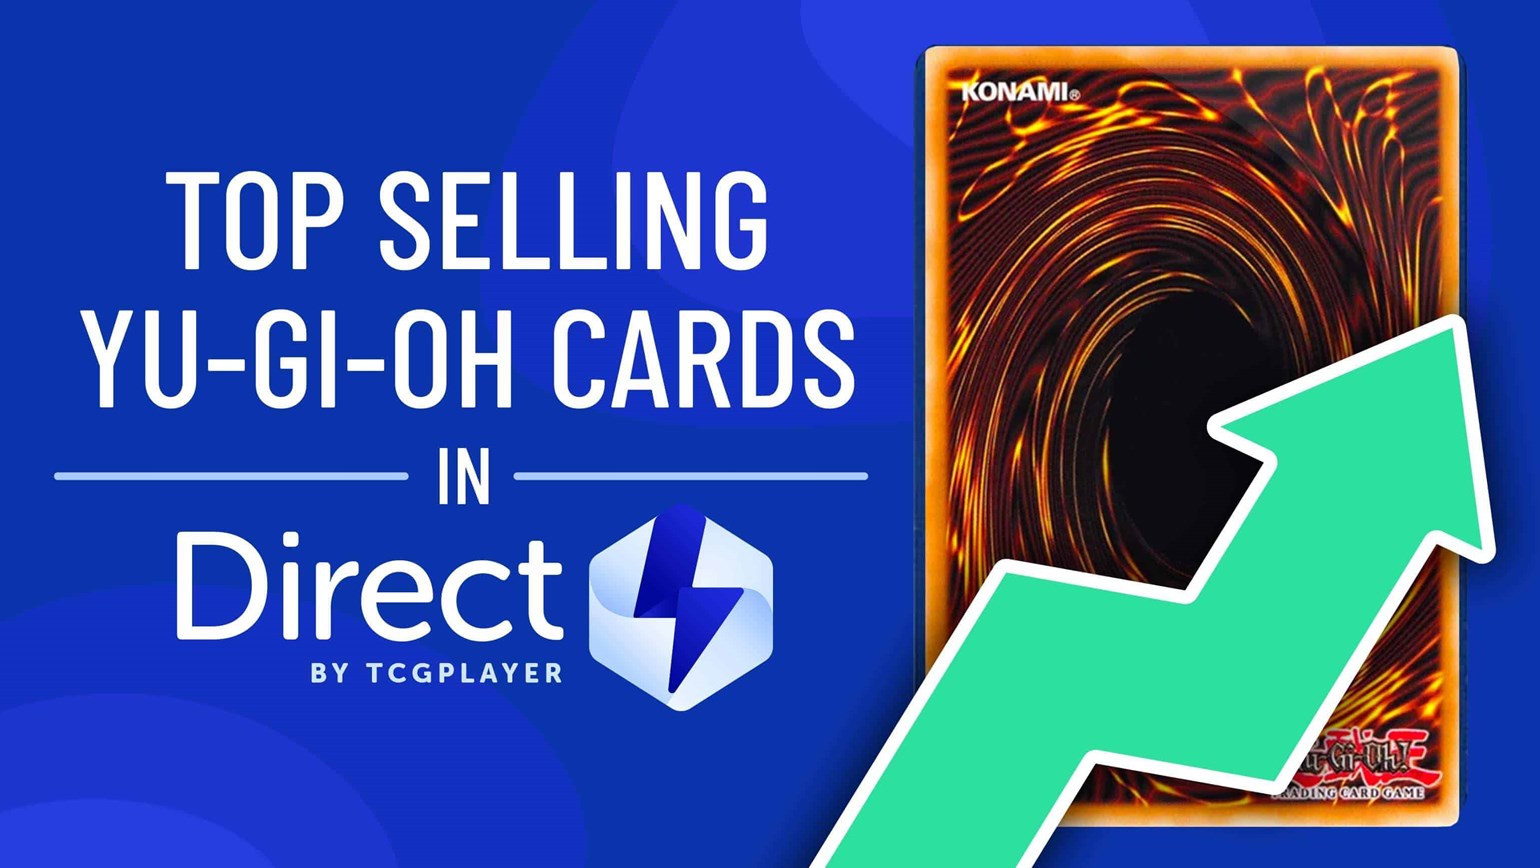 October Top Selling Yu-Gi-Oh! Cards Under $25 in Direct by TCGplayer